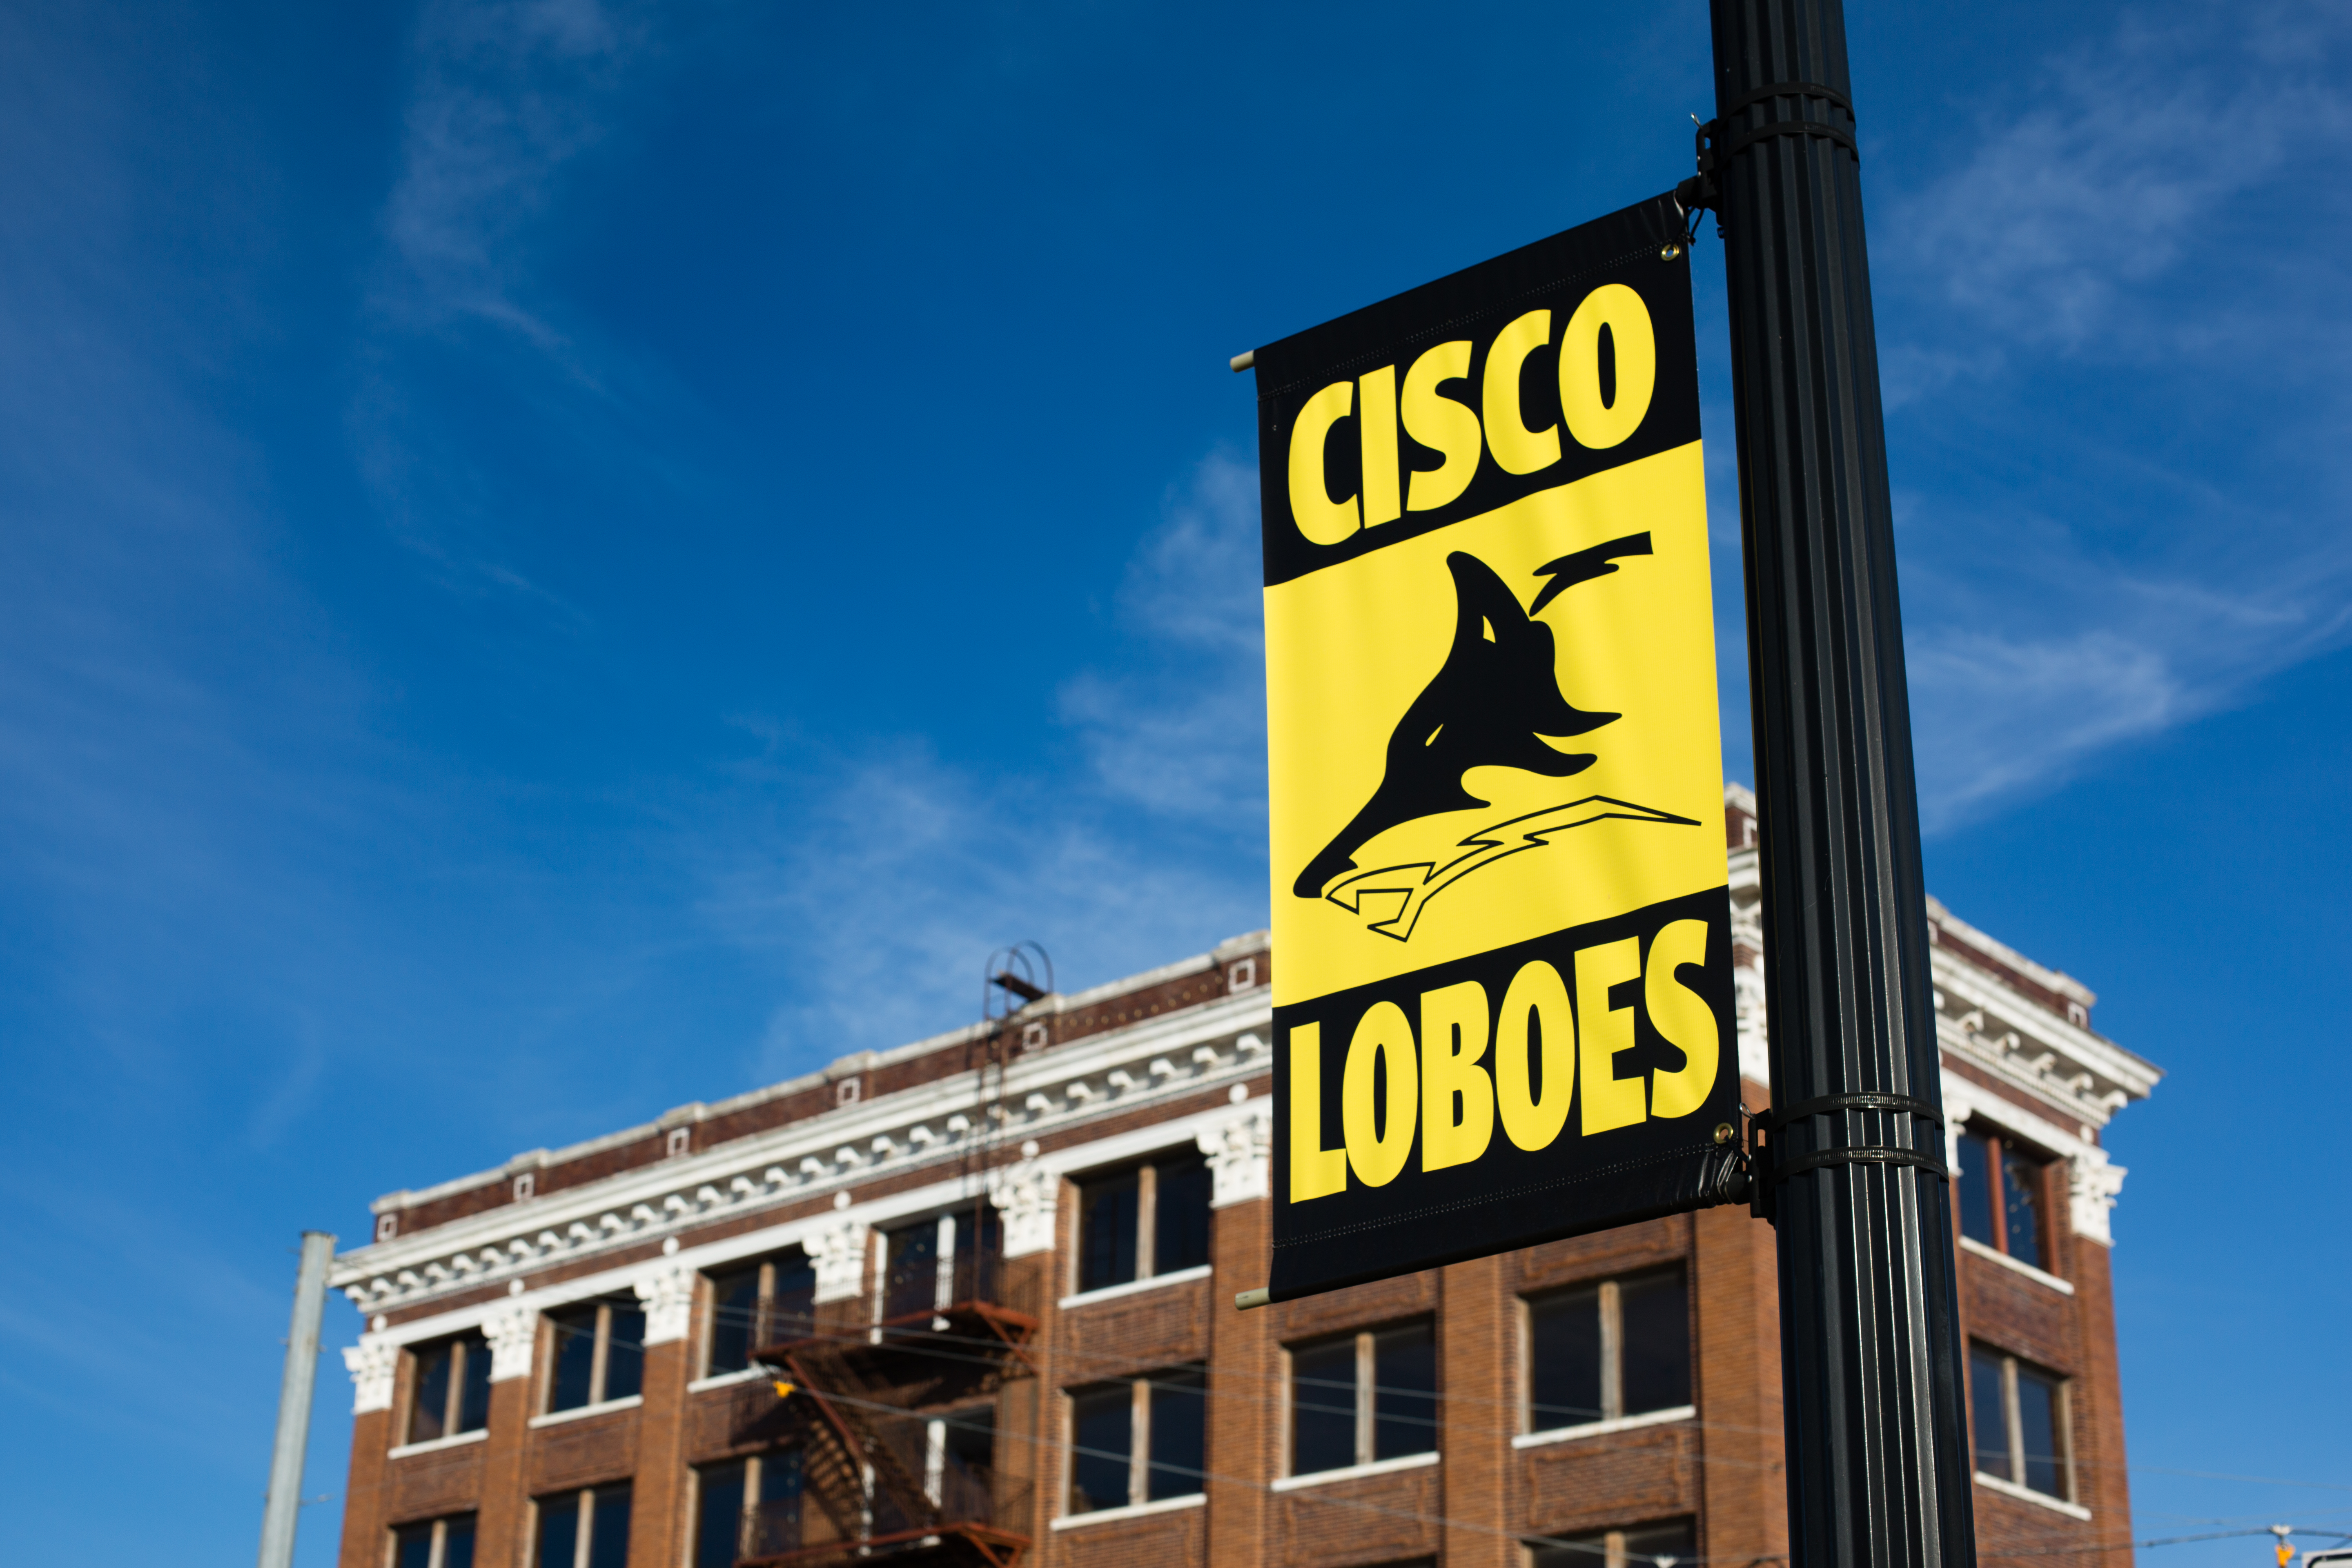 Outdoor view of school building, with a yellow and black sign reading "Cisco Loboes" in the foreground, showing the school's mascot
